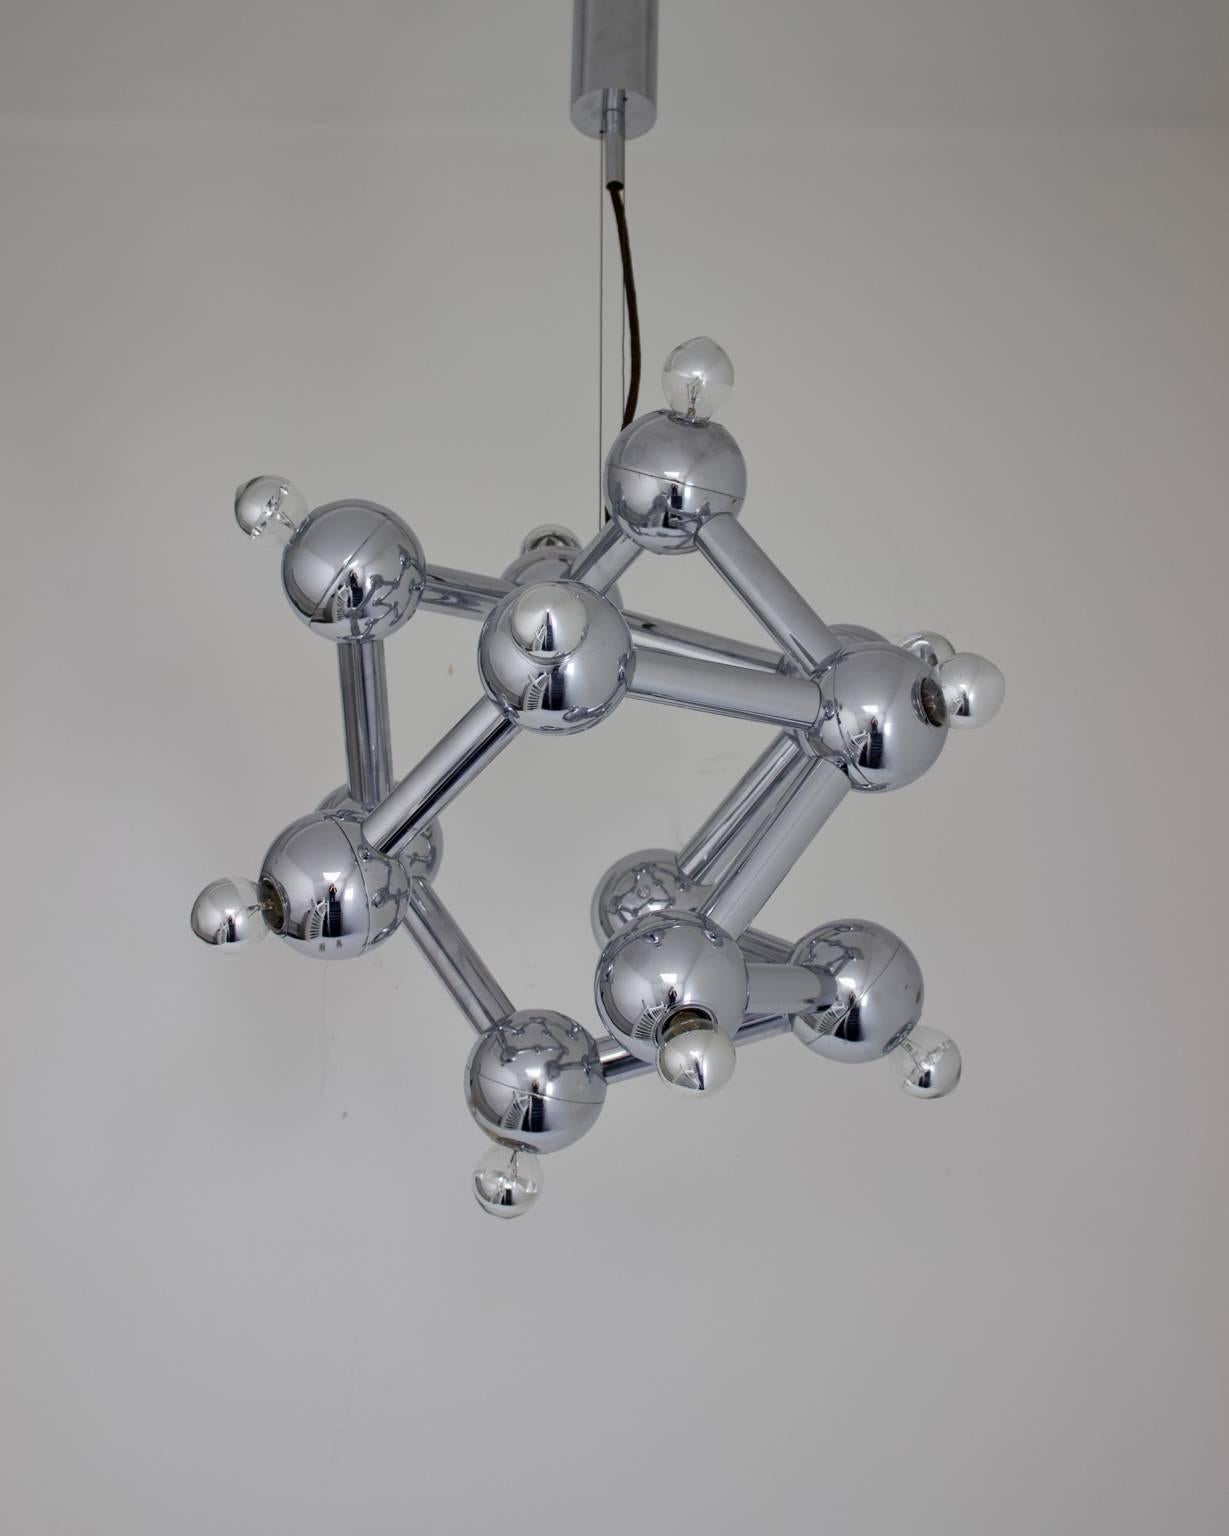 Atomic or space-age chandelier finished in polished chrome. Design 1960s-1970s by Kalmar of Austria, model 